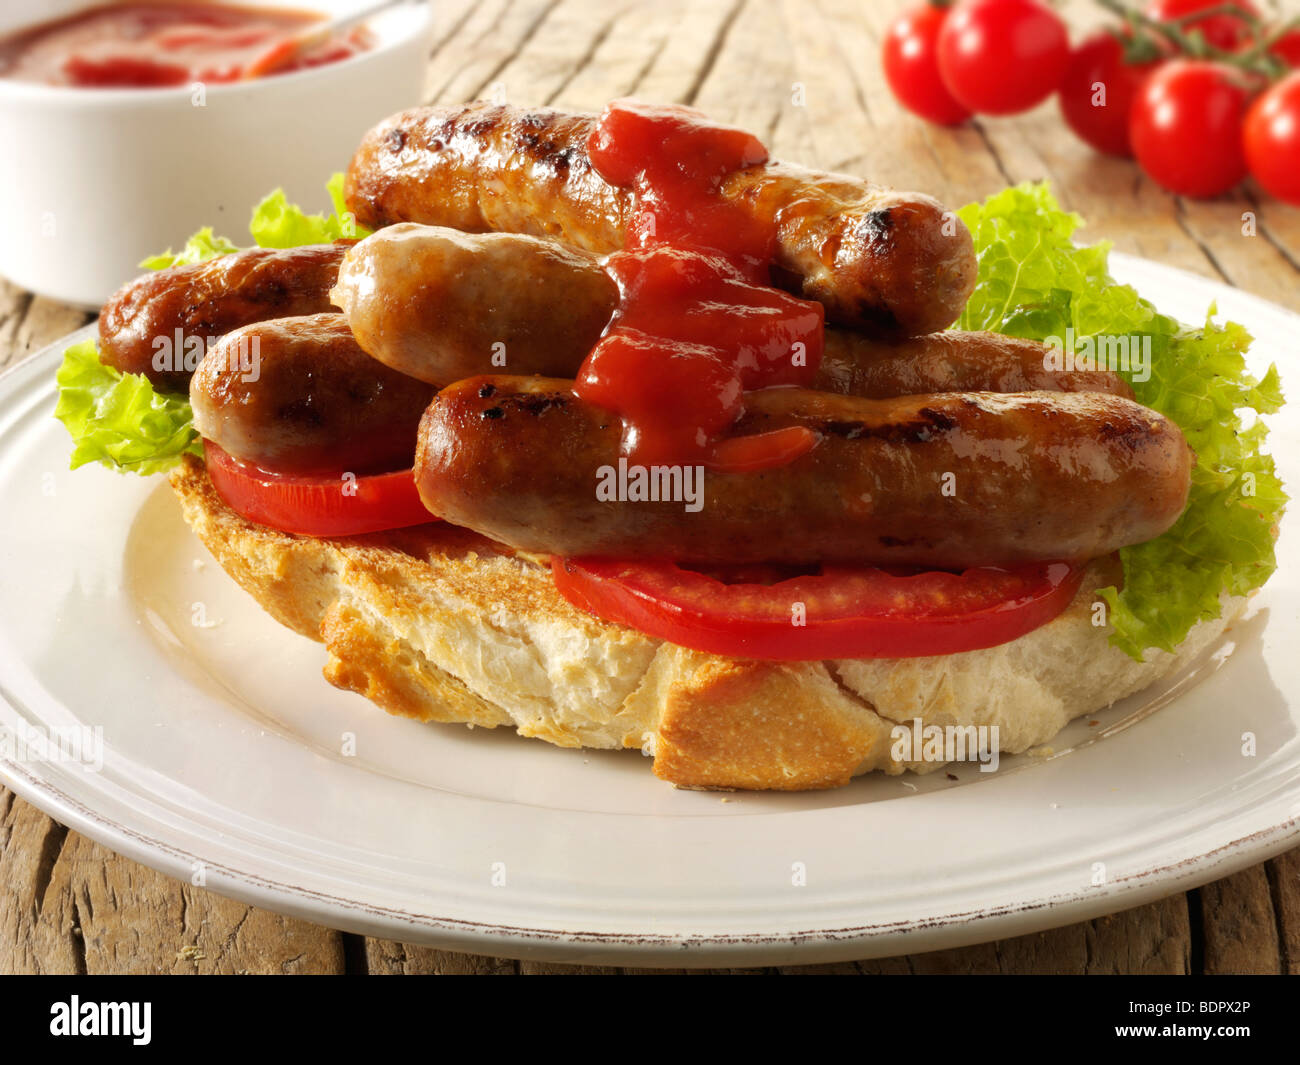 Traditional chipolatta pork sausages with tomato ketchup sandwich Stock Photo